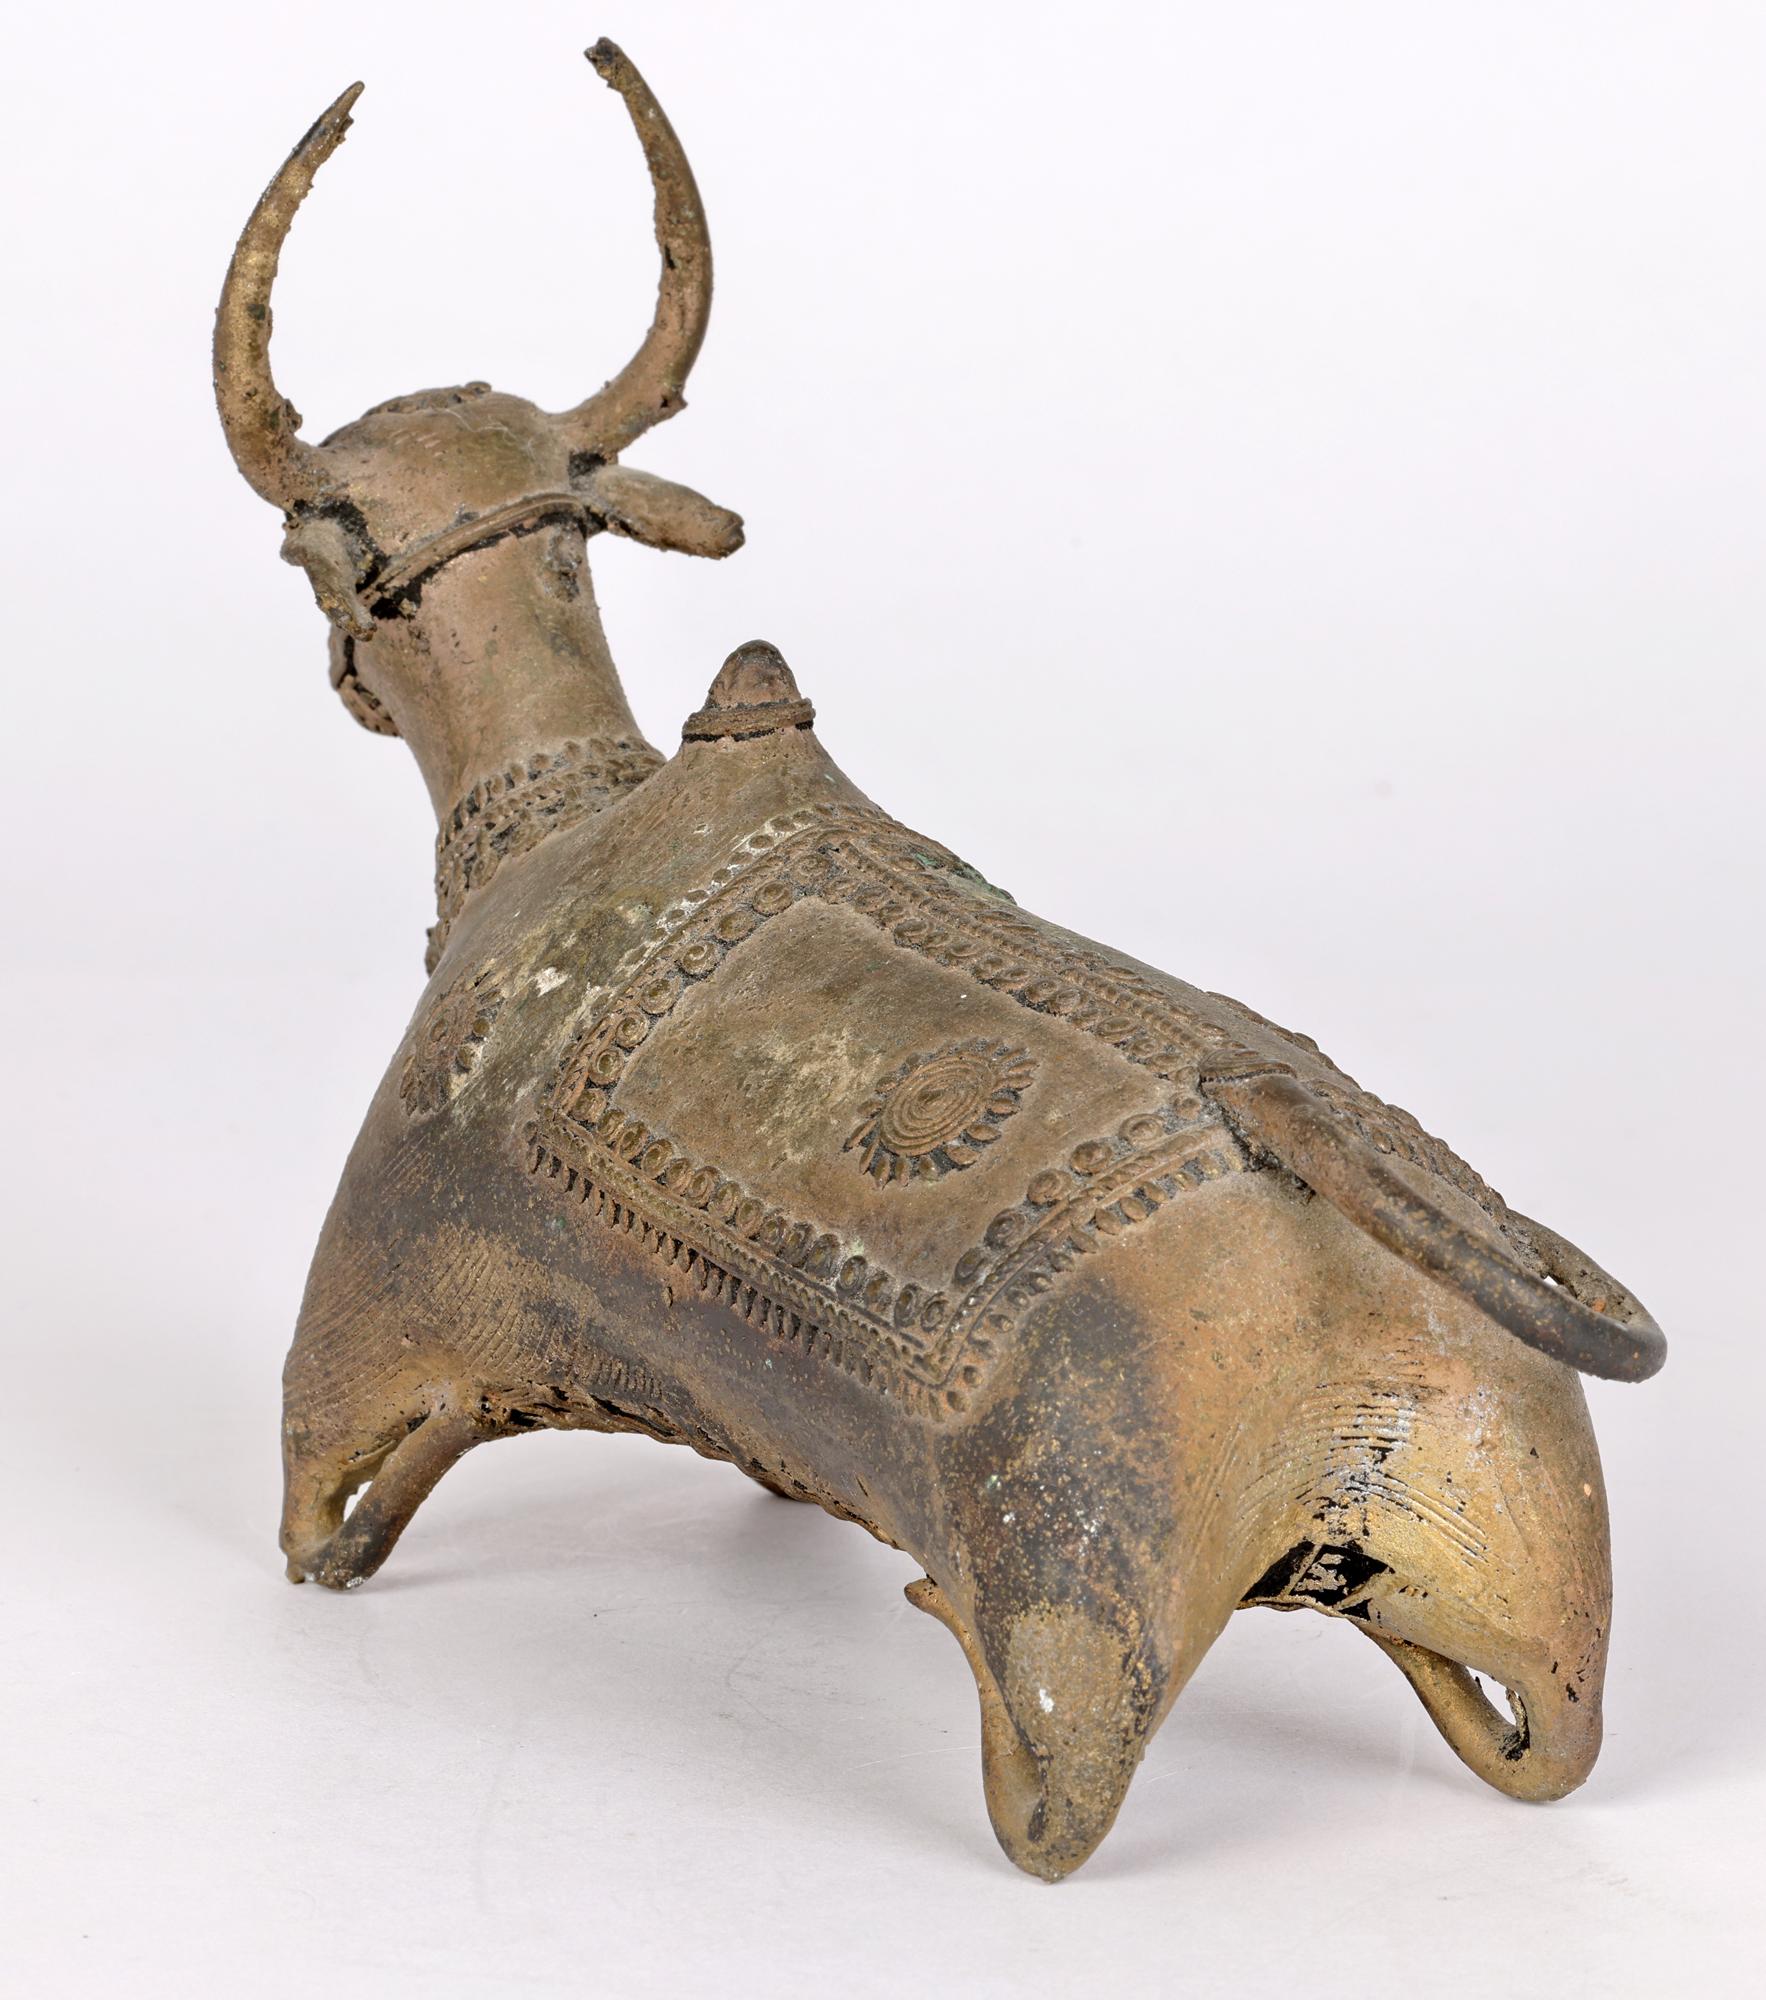 A stylish antique Khond bronzed metal stylized figure of an Ox dating from the early to mid 20th century made in Orissa, India. 

The Khonds are an indigenous Adivasi tribal community in India and produce metal sculptures in a very distinctive and